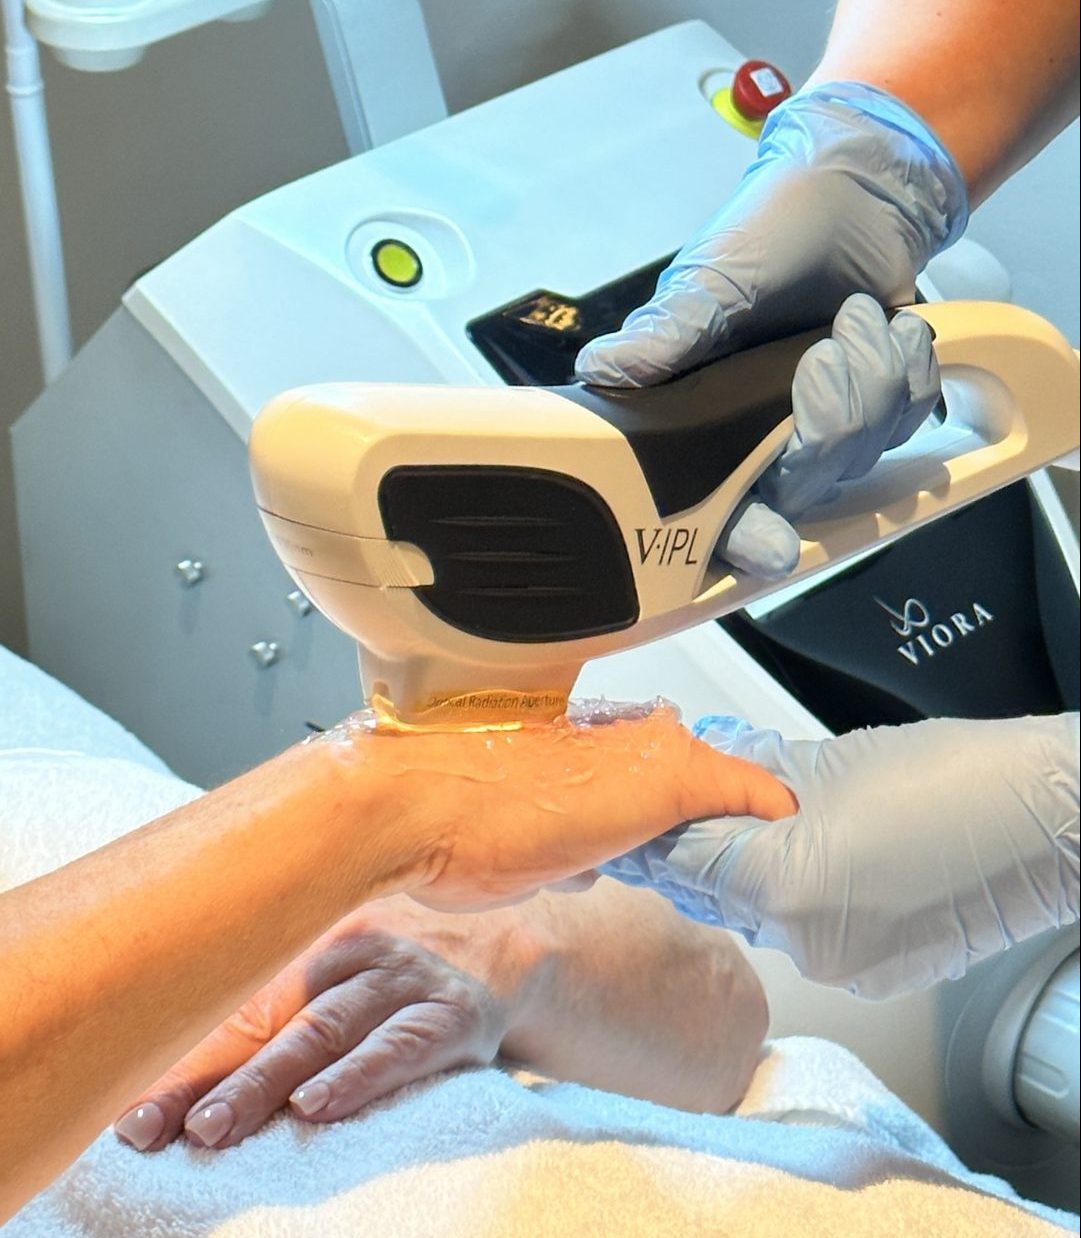 woman getting IPL treatment on her hand to treat sunspots at Nicola Quinn